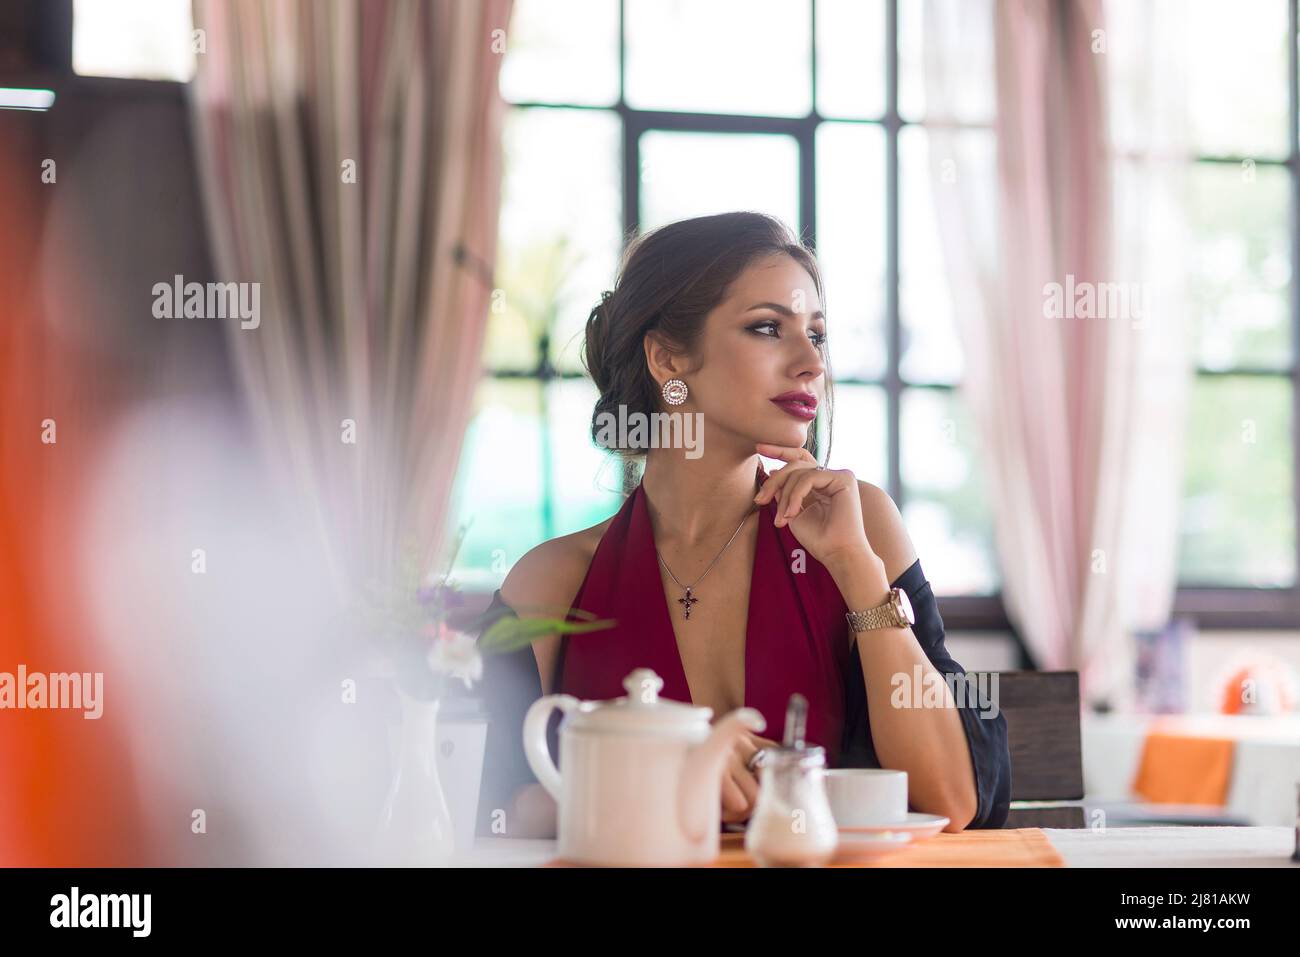 Stylish young woman drinking tea or coffee at a cafe. She enjoys the taste and looking by side. Stock Photo